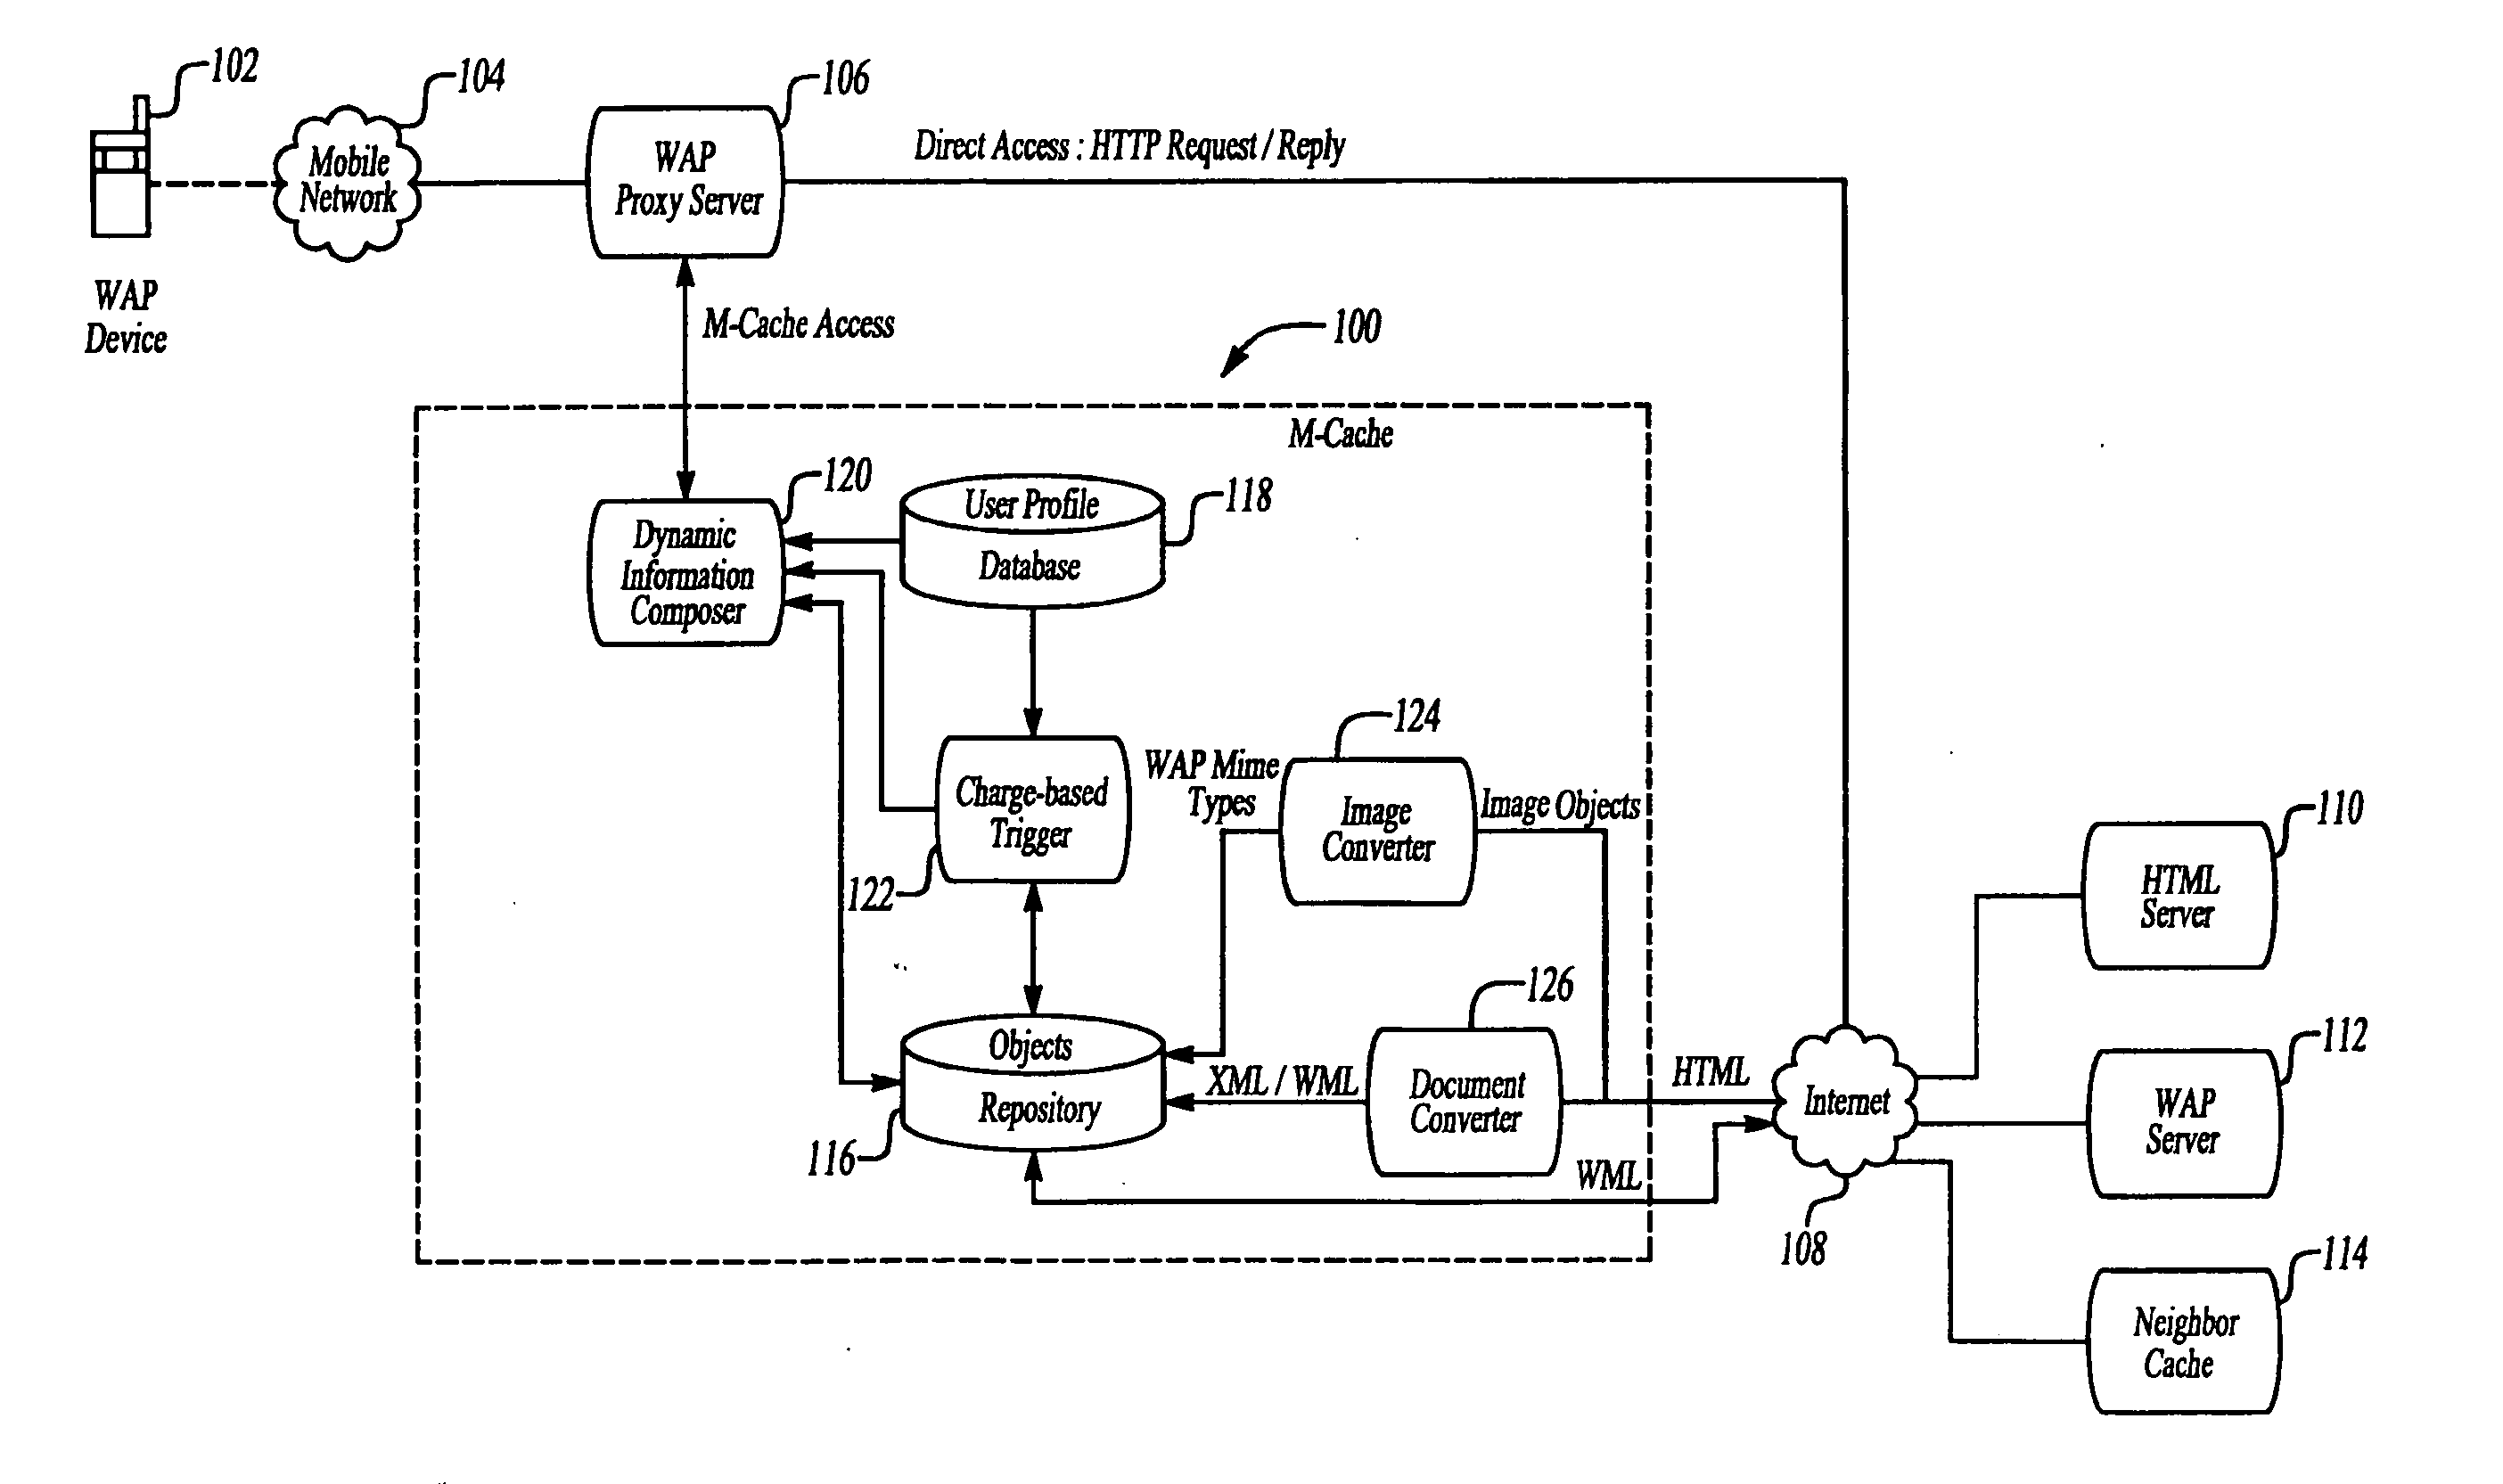 Mobile cache for dynamically composing user-specific information